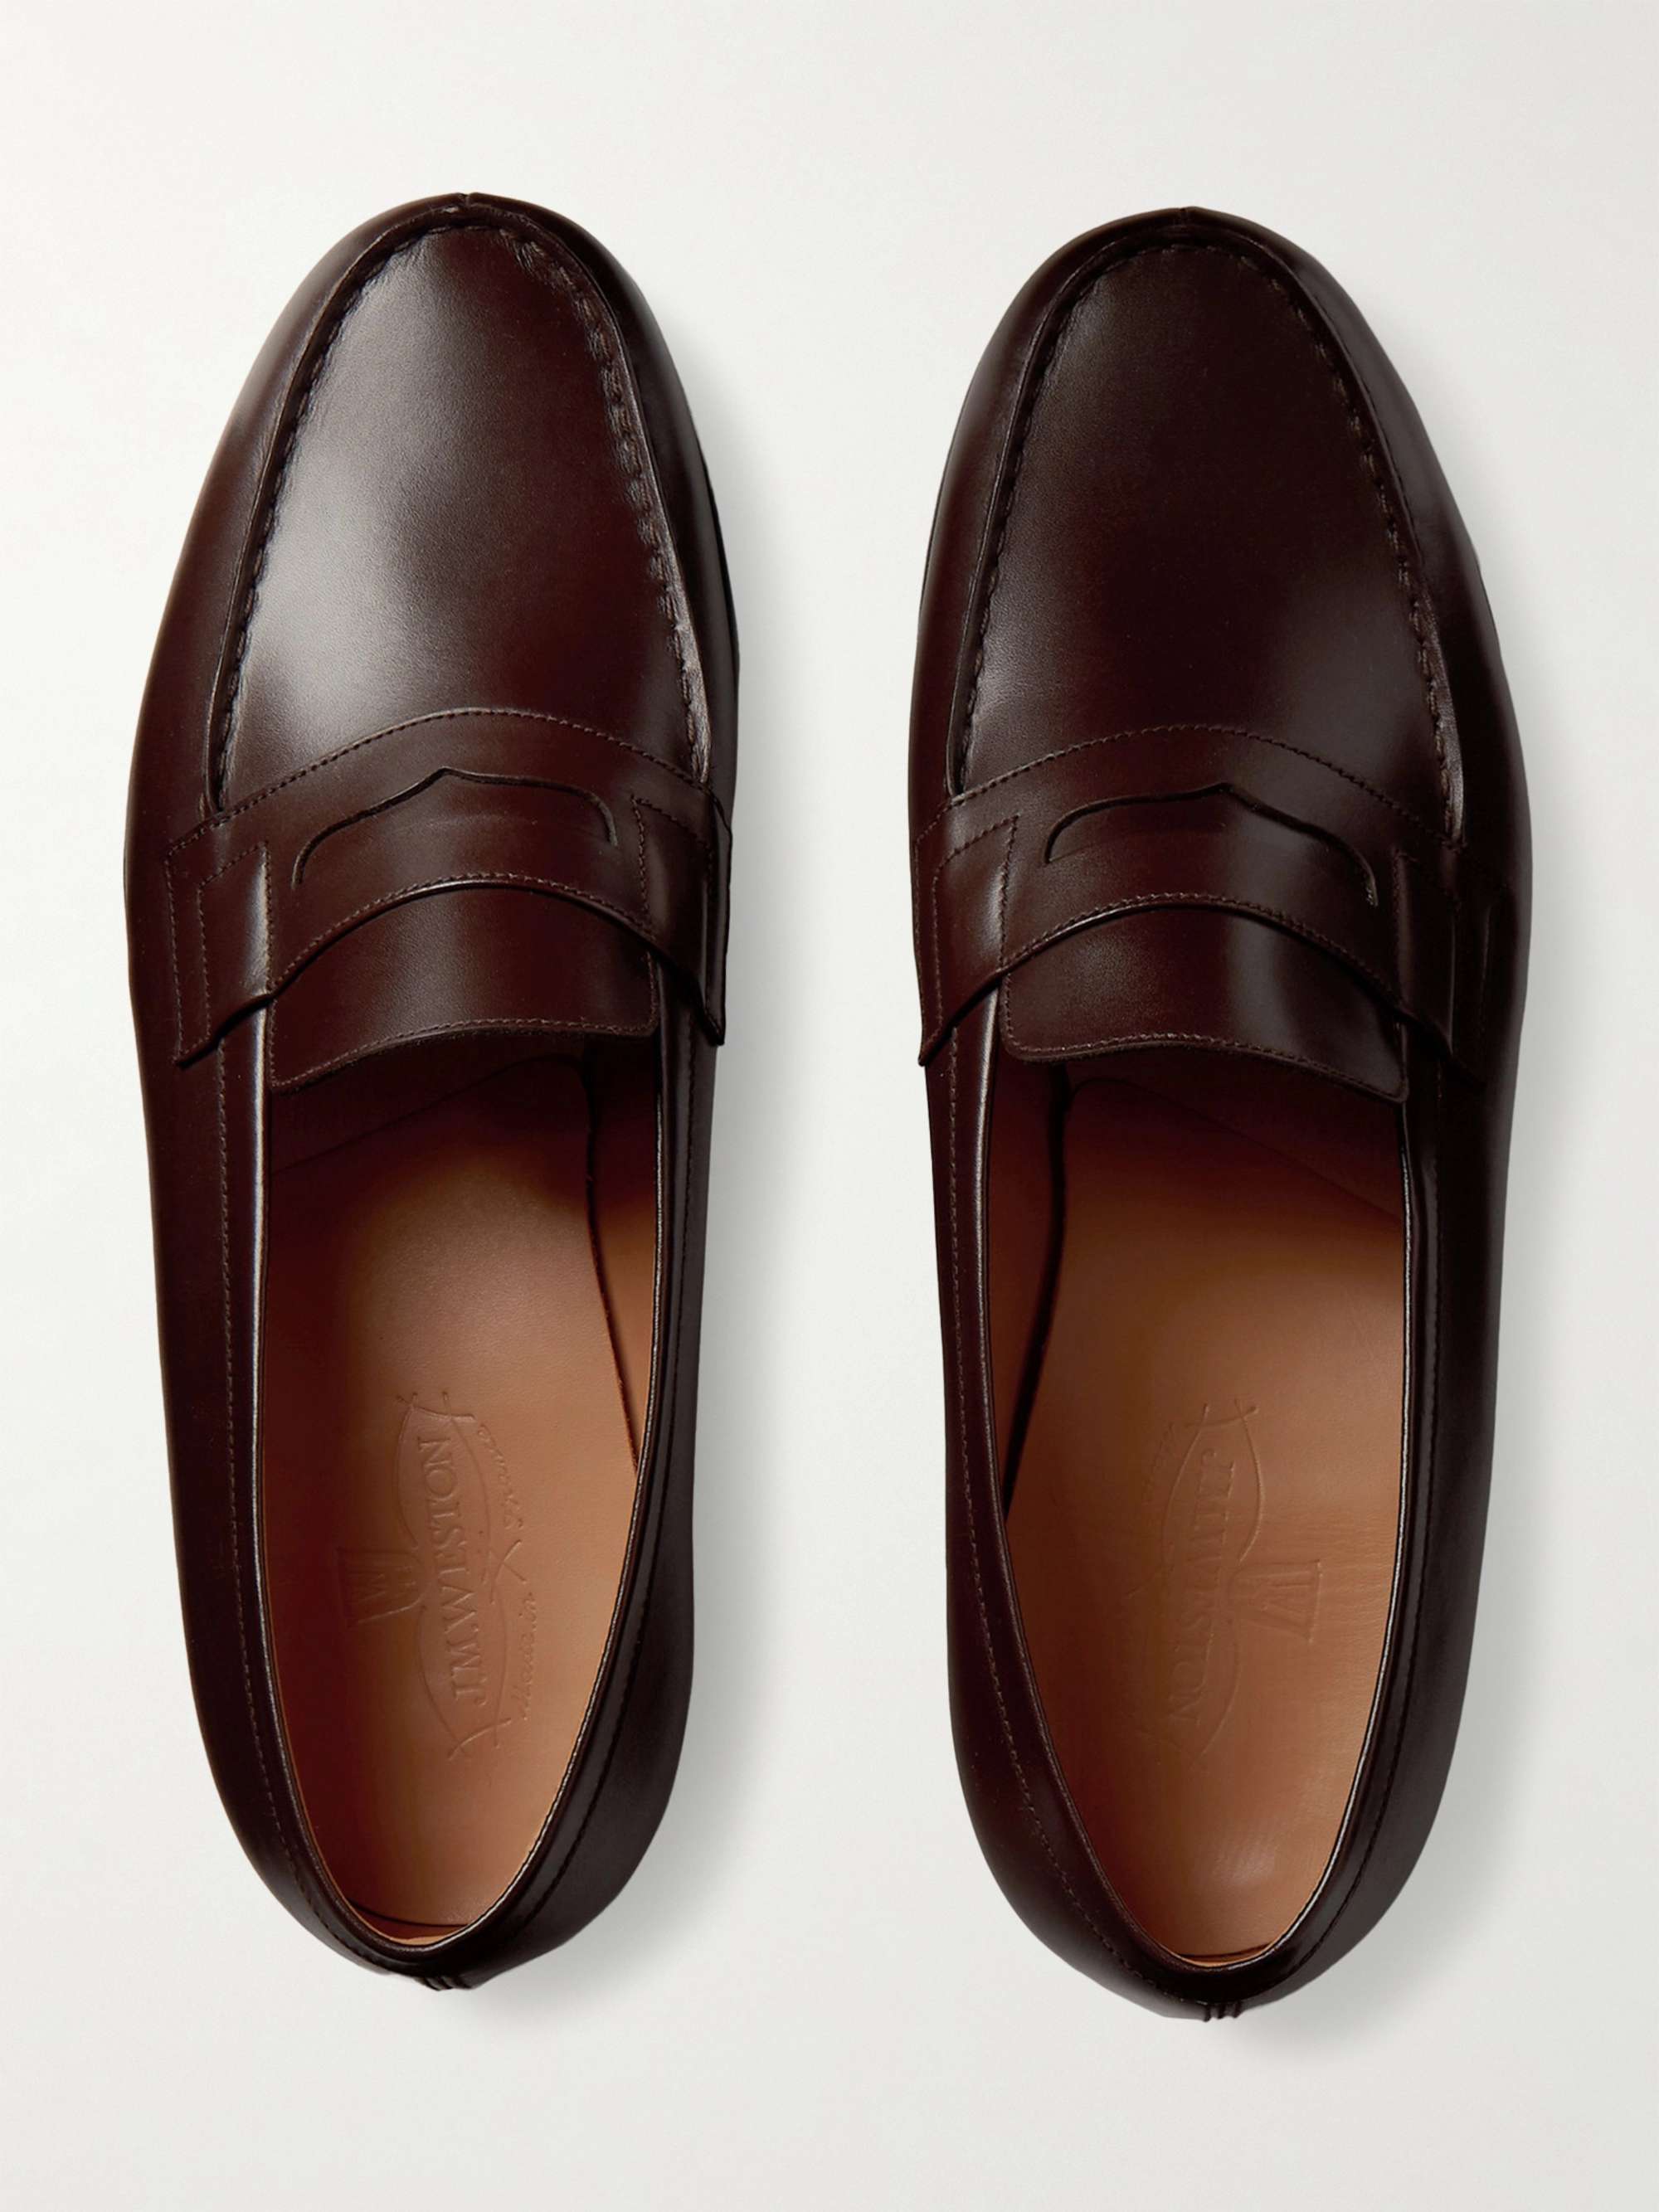 J.M. Weston 180 Moccasin Leather Loafers